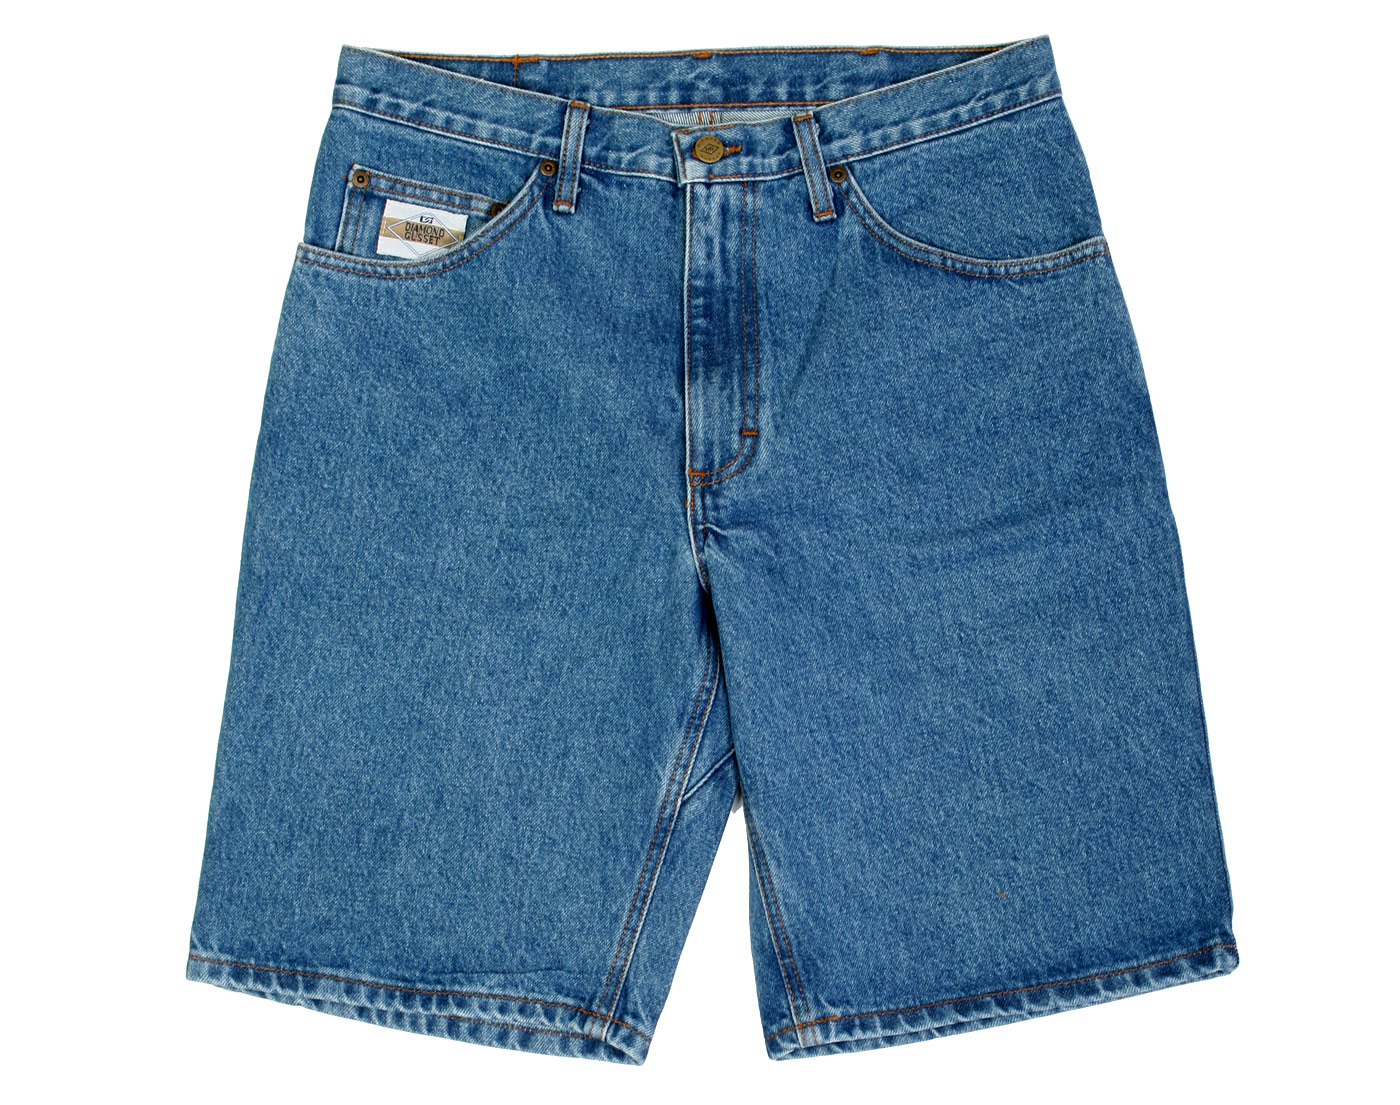 Pray tell, what may be this is of jorts and how might one lay their ...